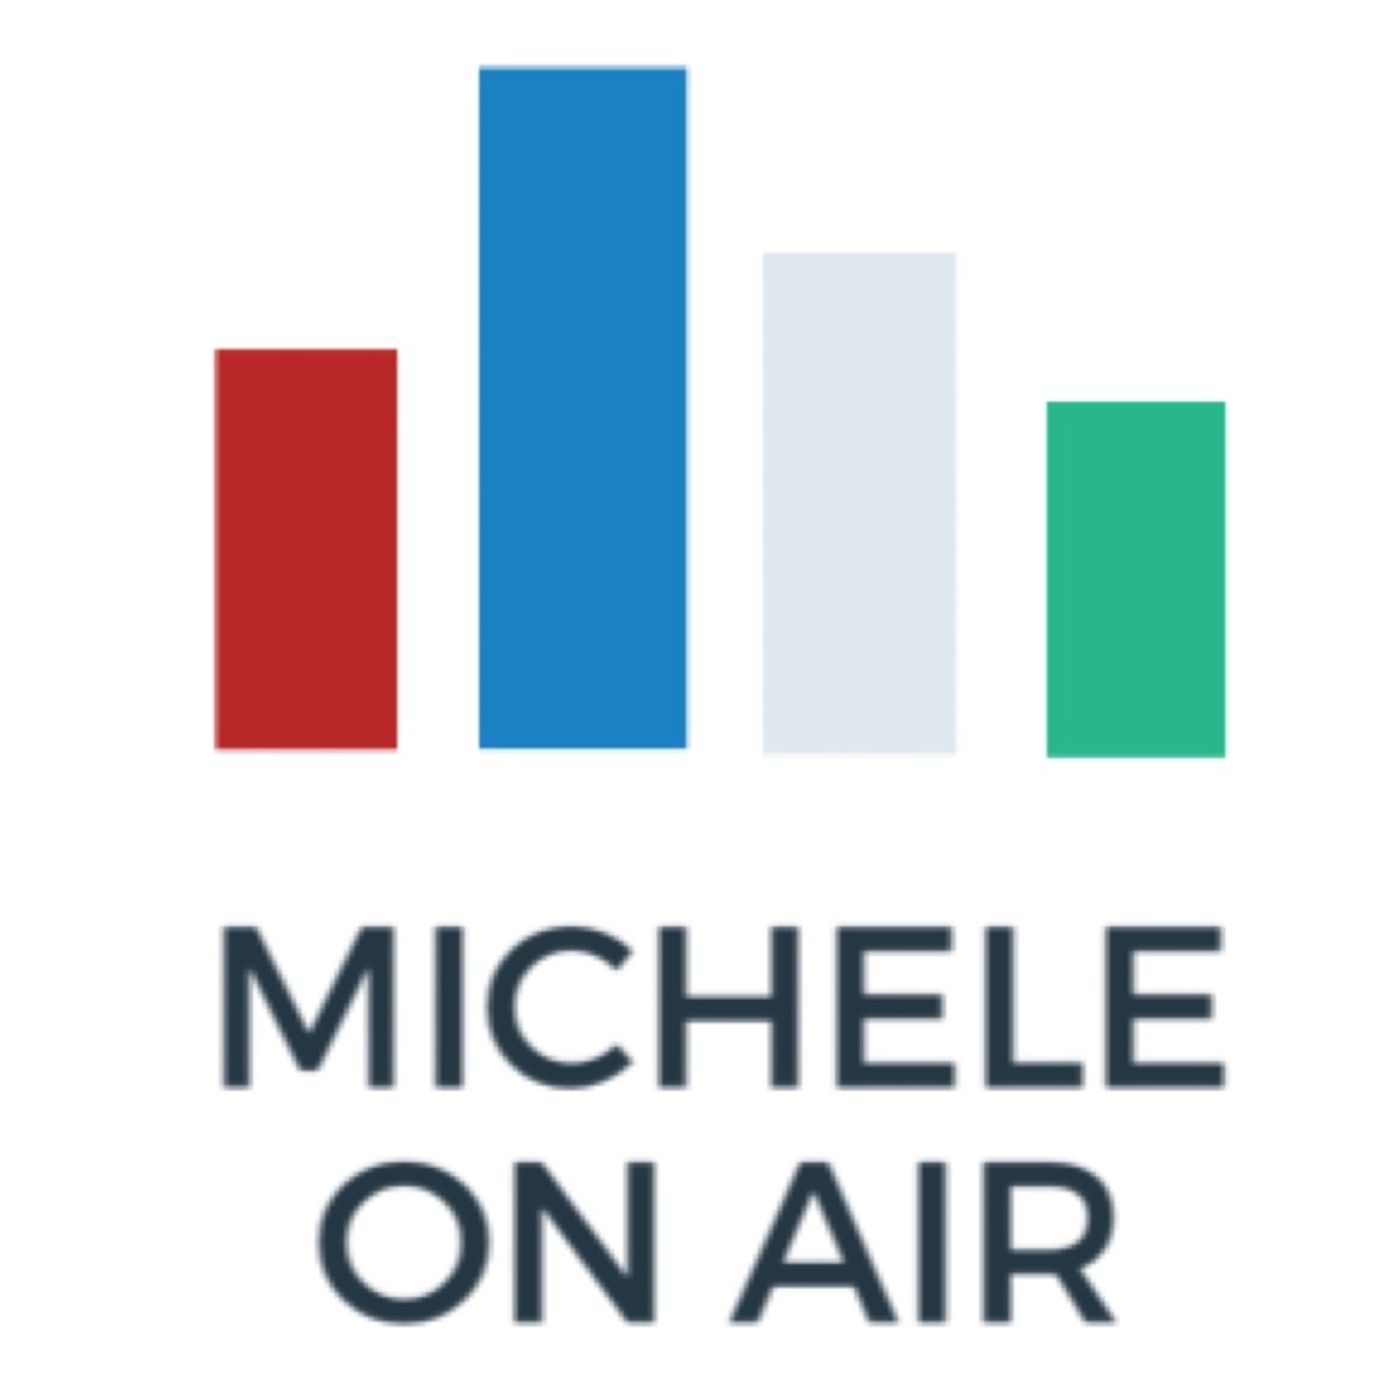 1. Michele On Air